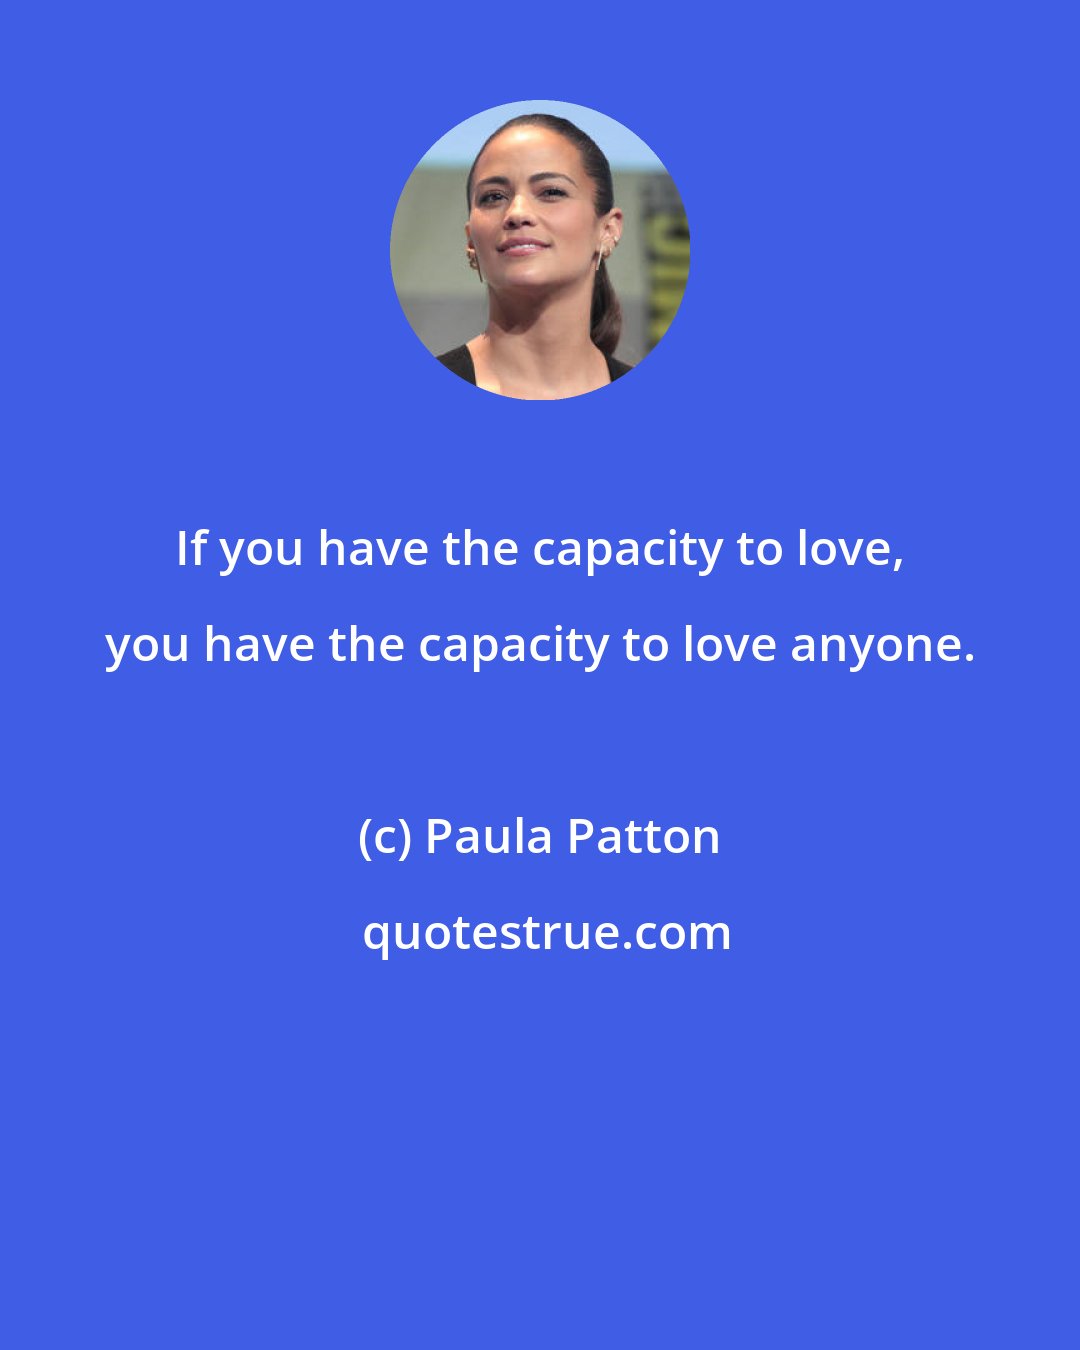 Paula Patton: If you have the capacity to love, you have the capacity to love anyone.